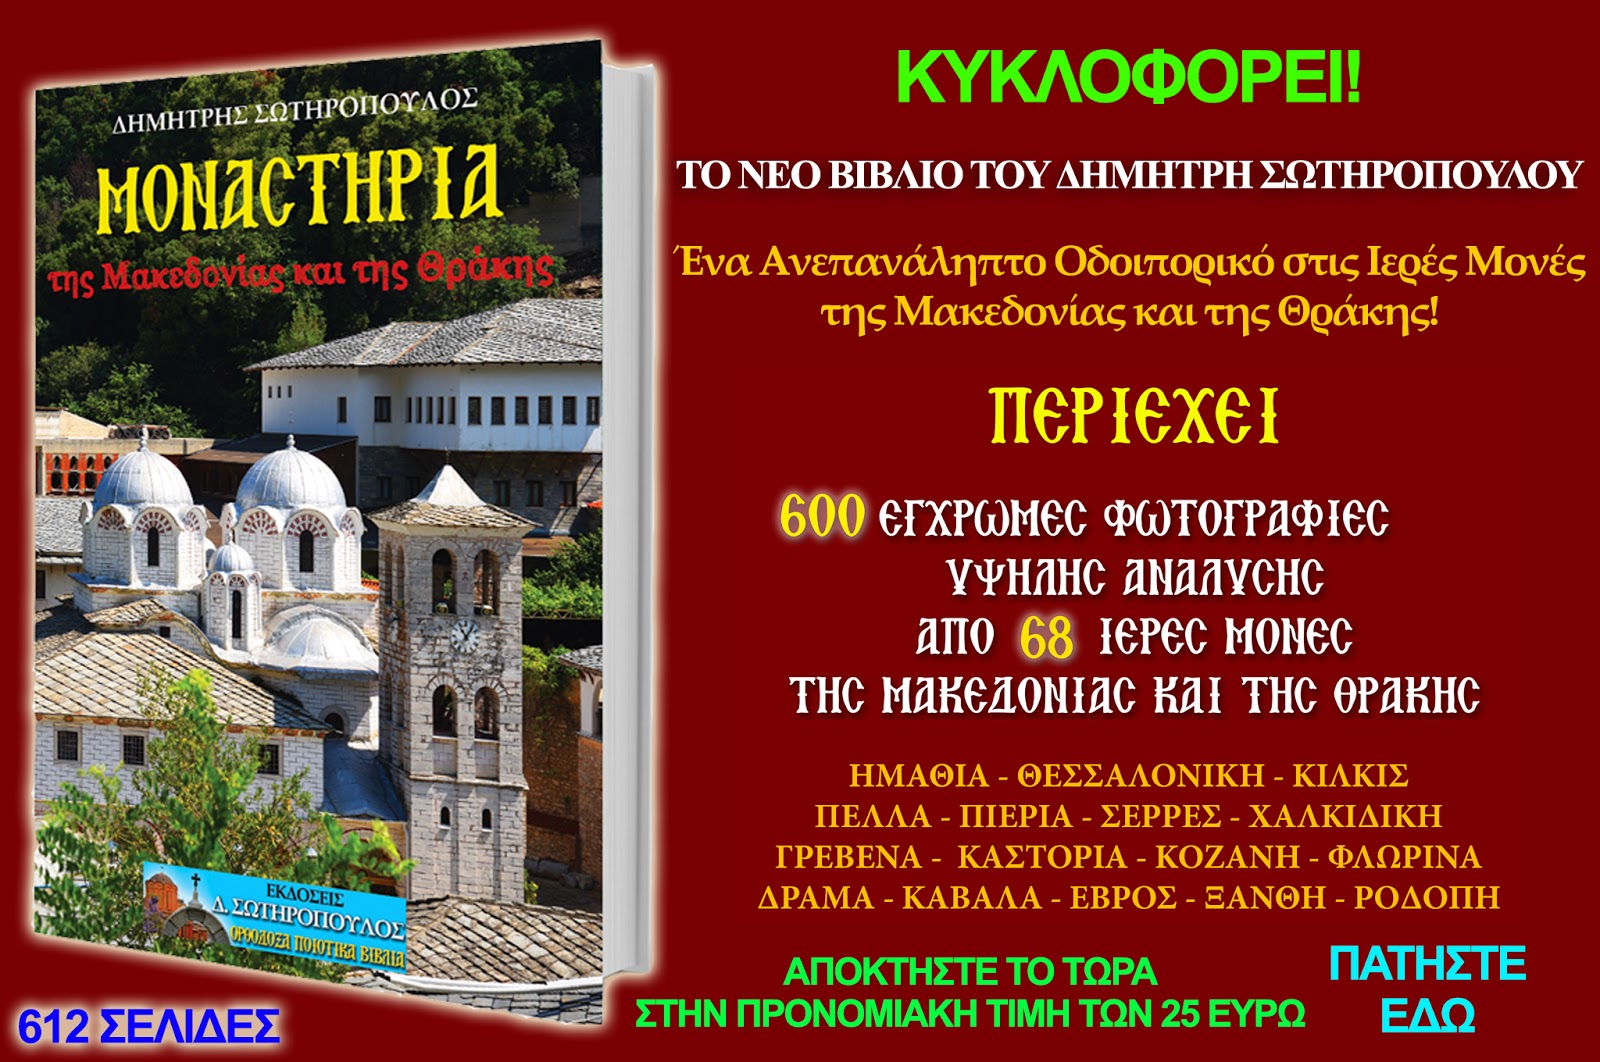 https://www.dimitrisotiropoulosbooks.com/collections/frontpage/products/product-8